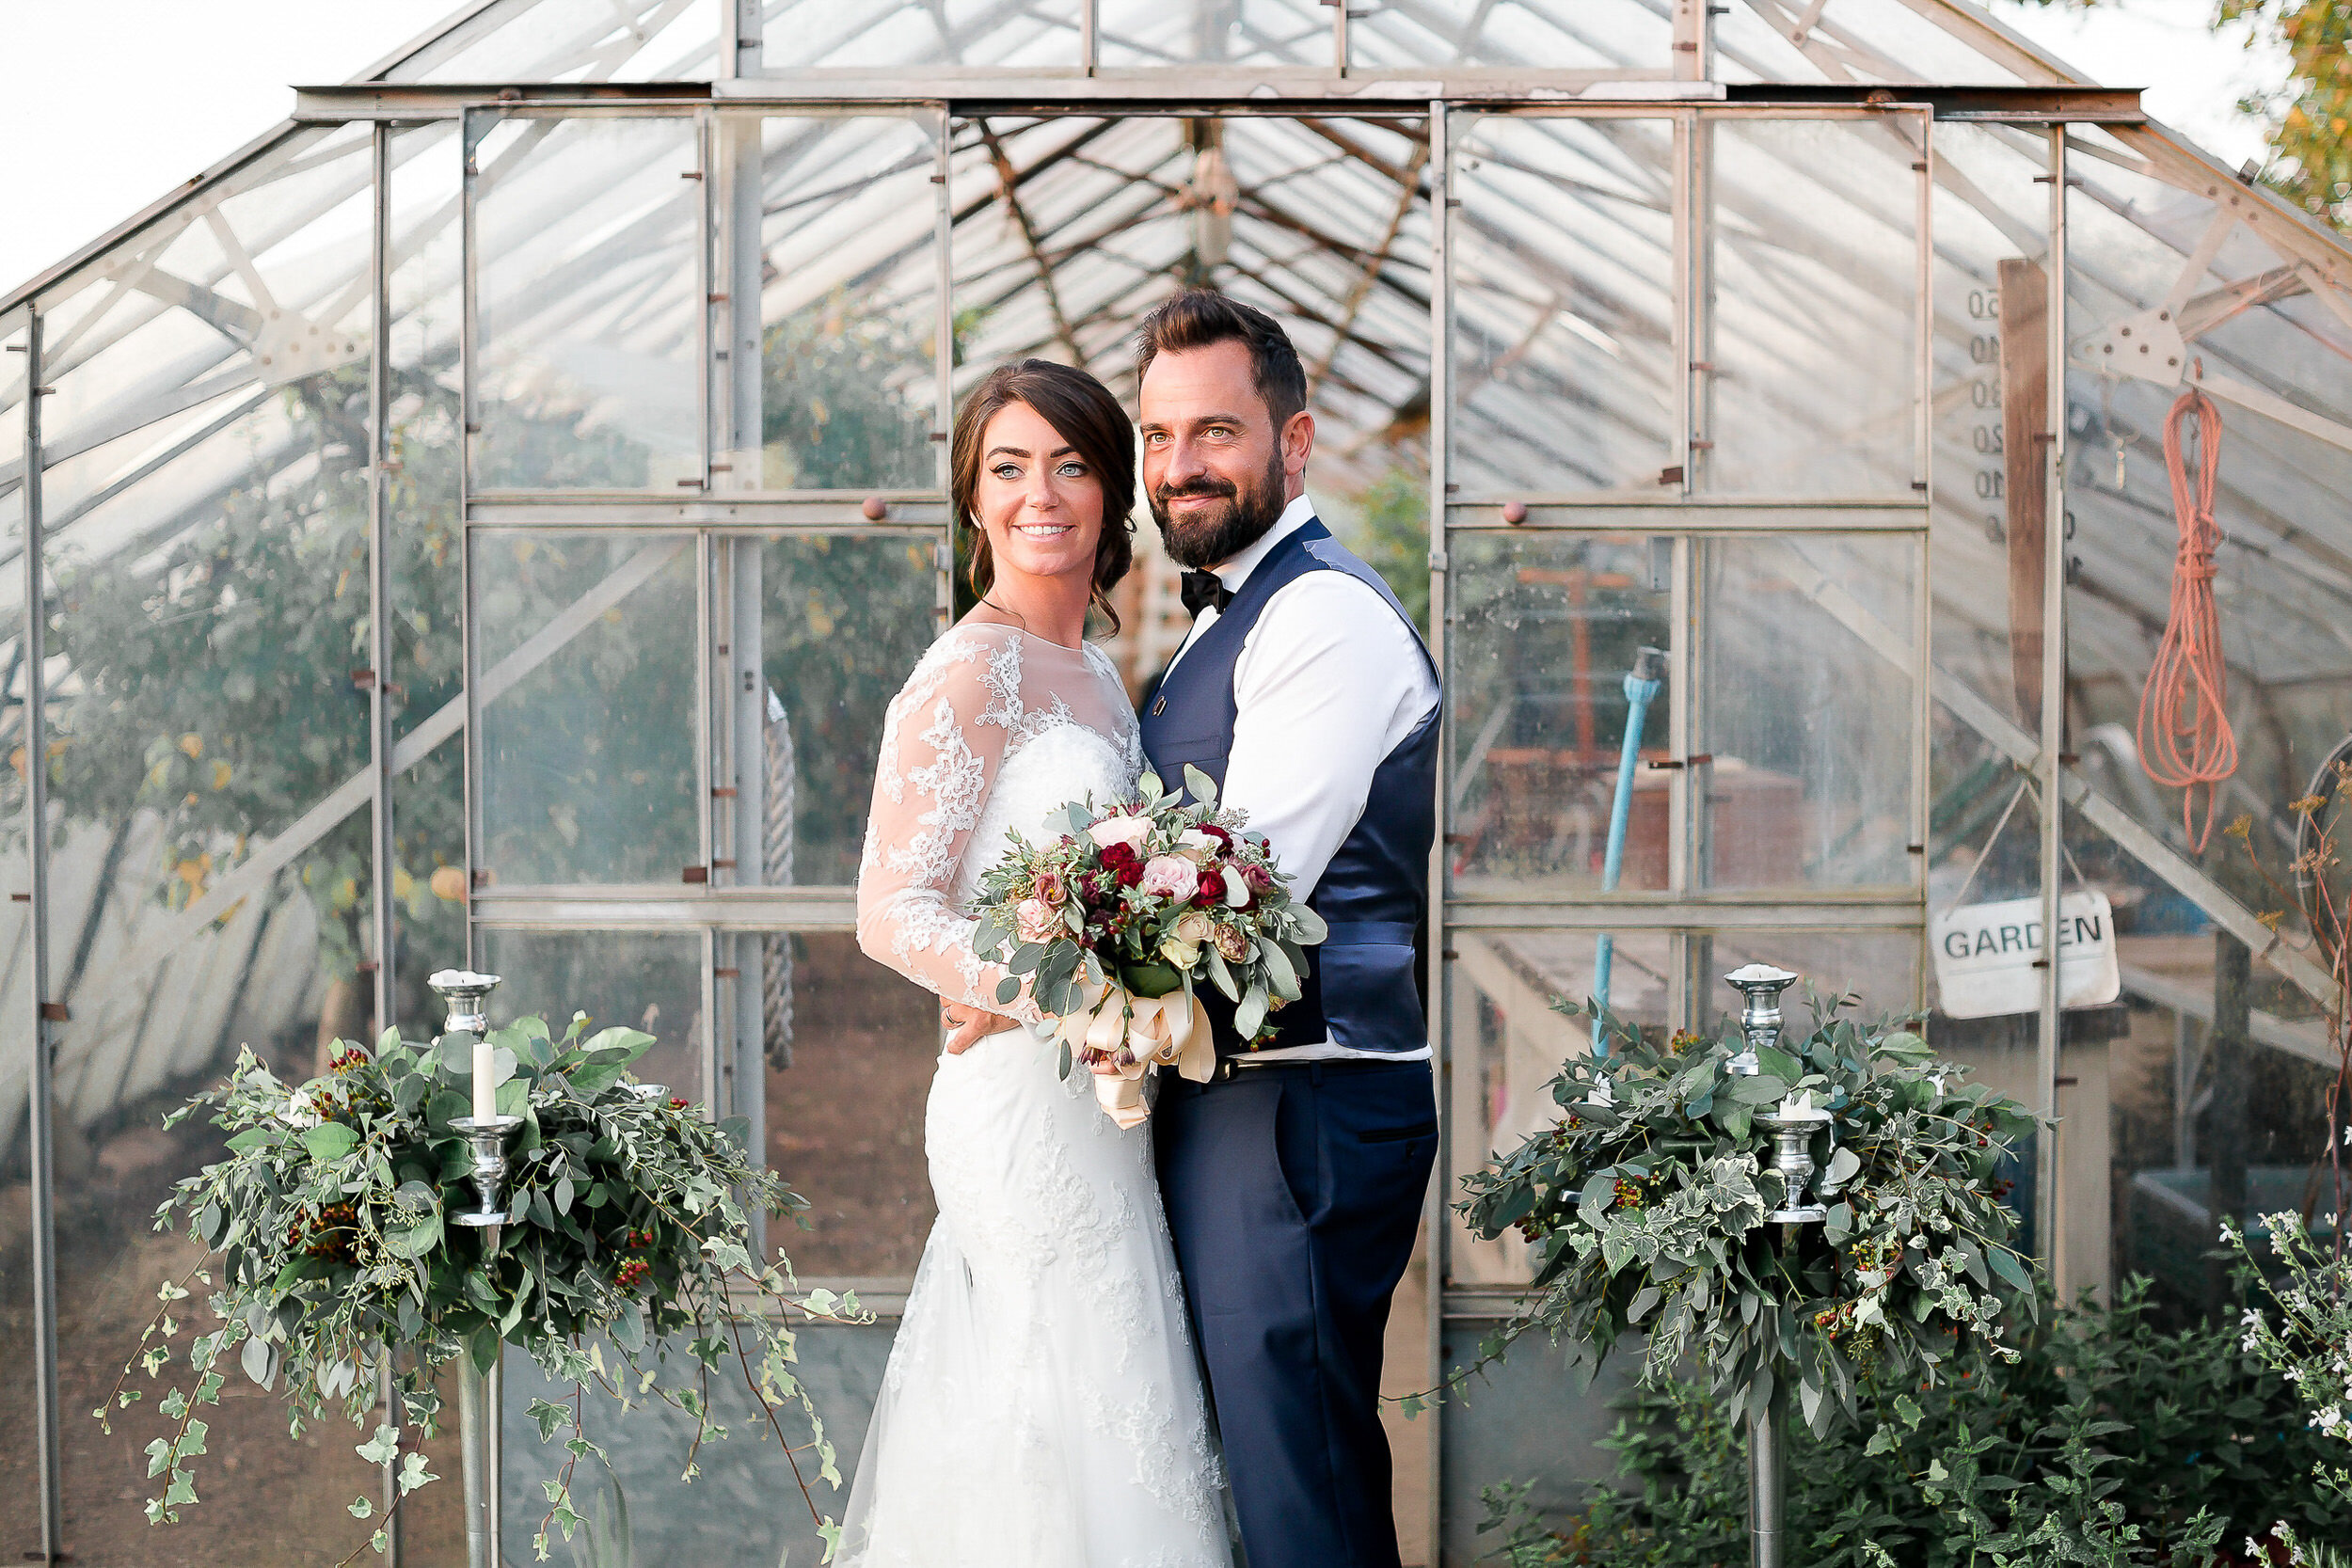 bride-groom-greenhouse-redhouse-barn-droitwich.jpg